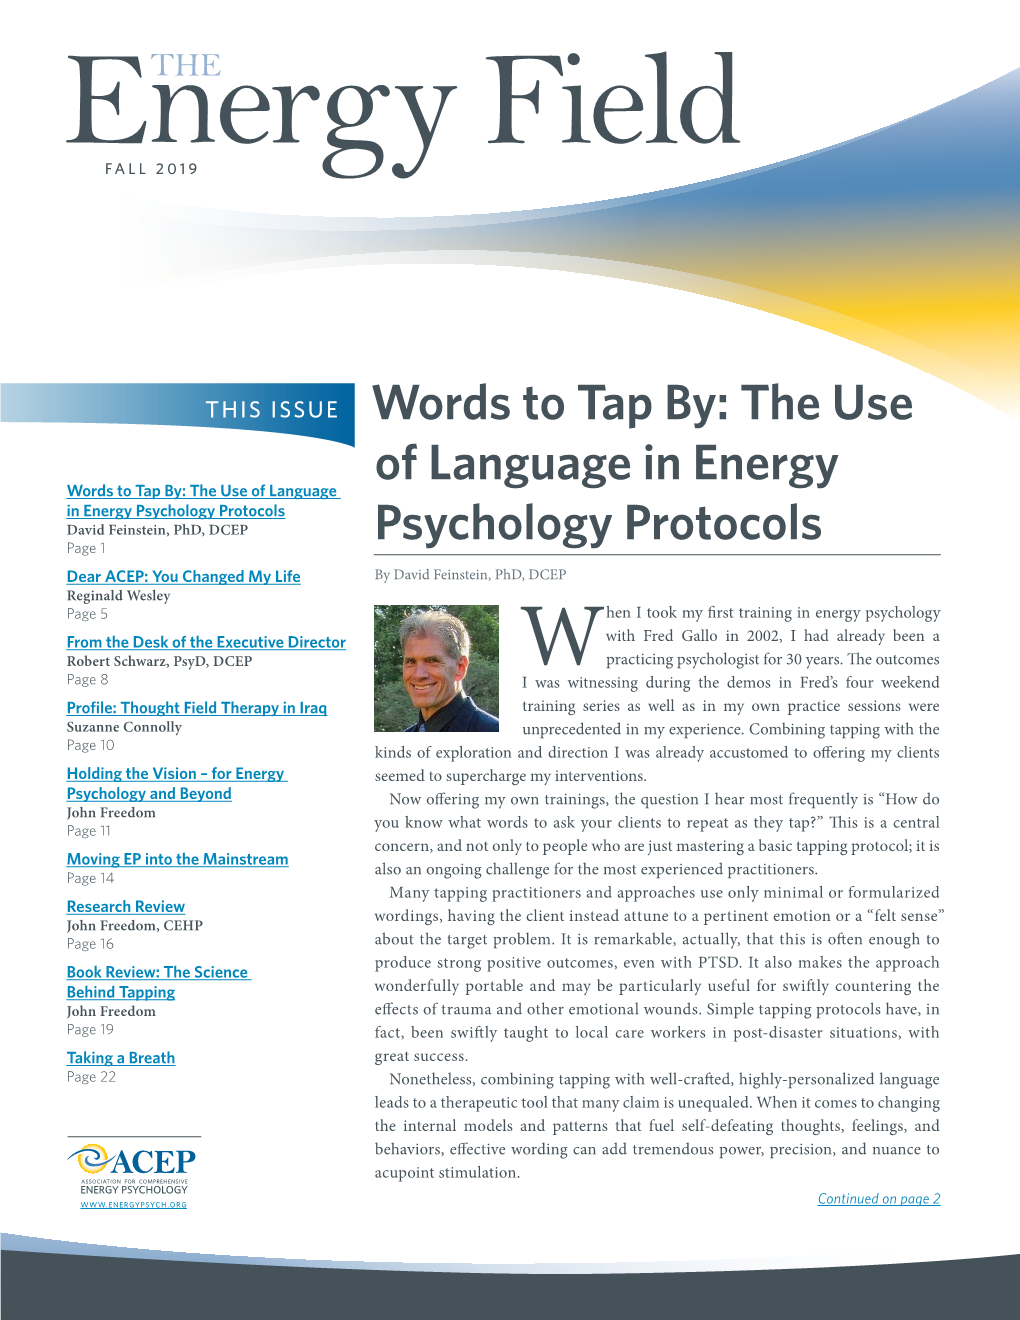 Words to Tap By: the Use of Language in Energy Psychology